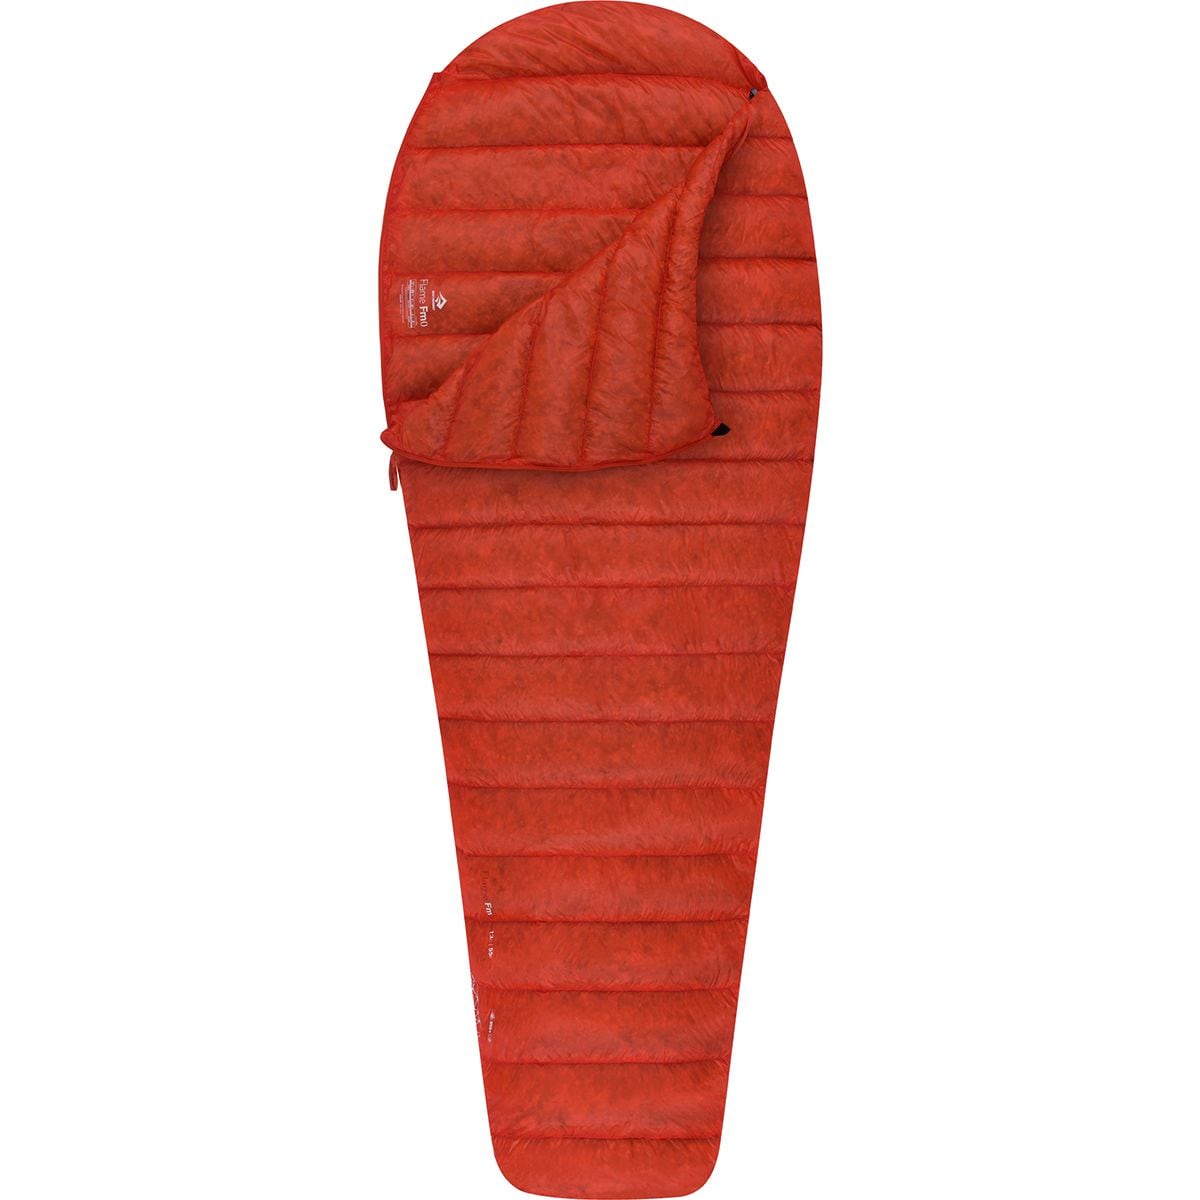 Sea To Summit Flame Fm0 Sleeping Bag: 55F Down - Women's product image